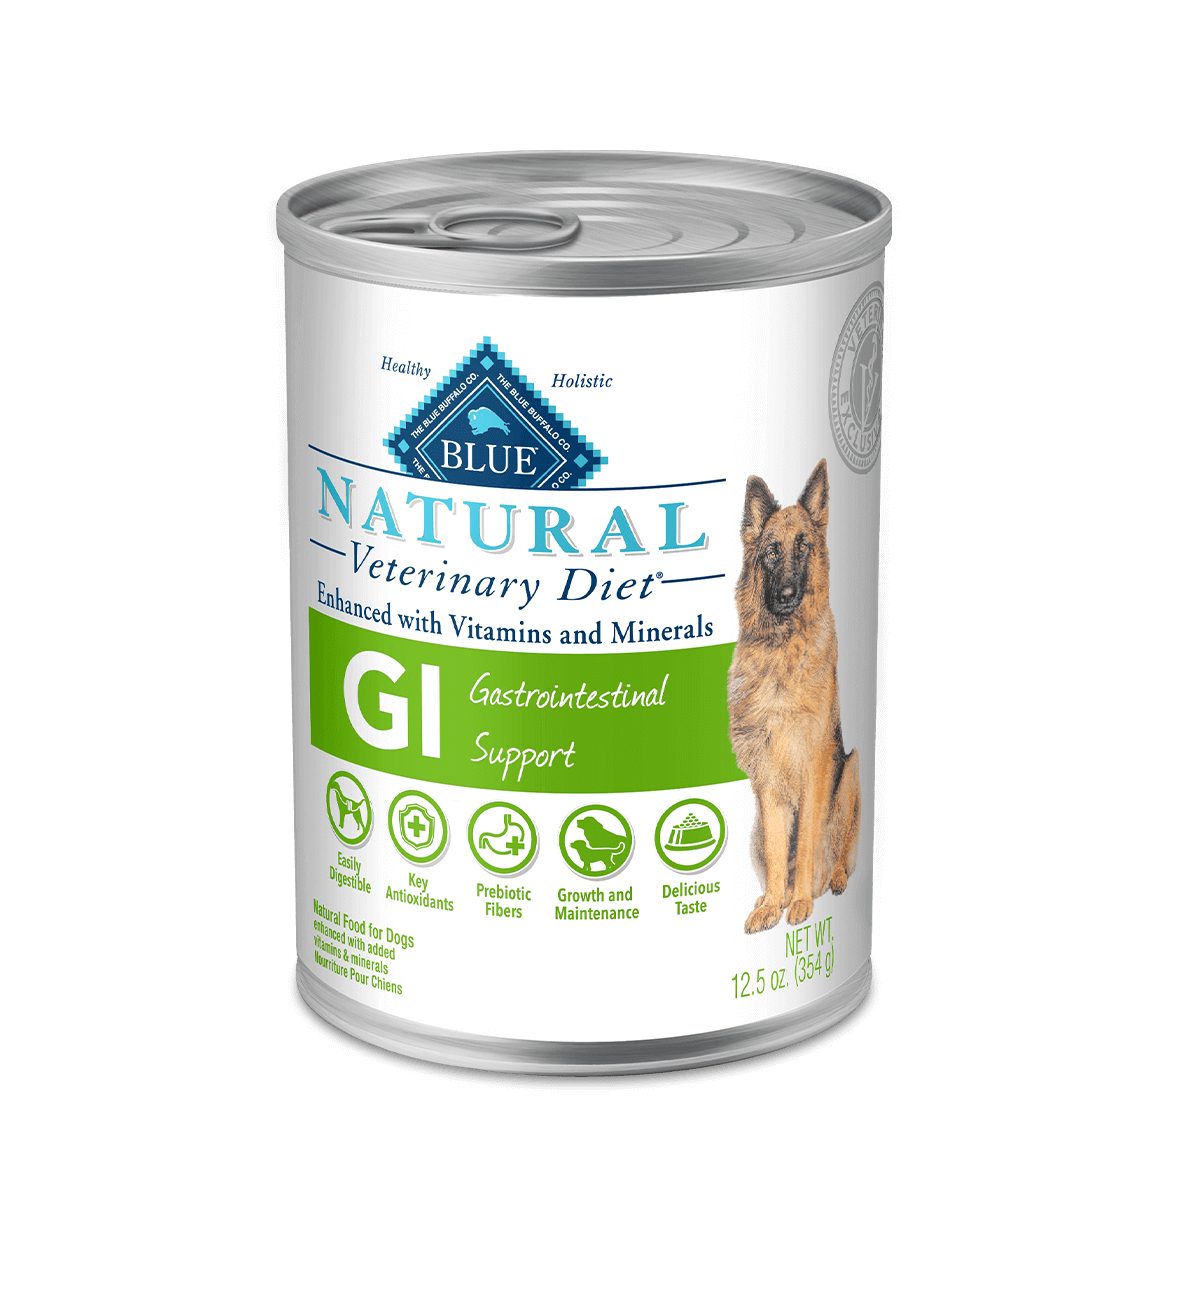 blue natural veterinary diet gi gastrointestinal support dog wet food